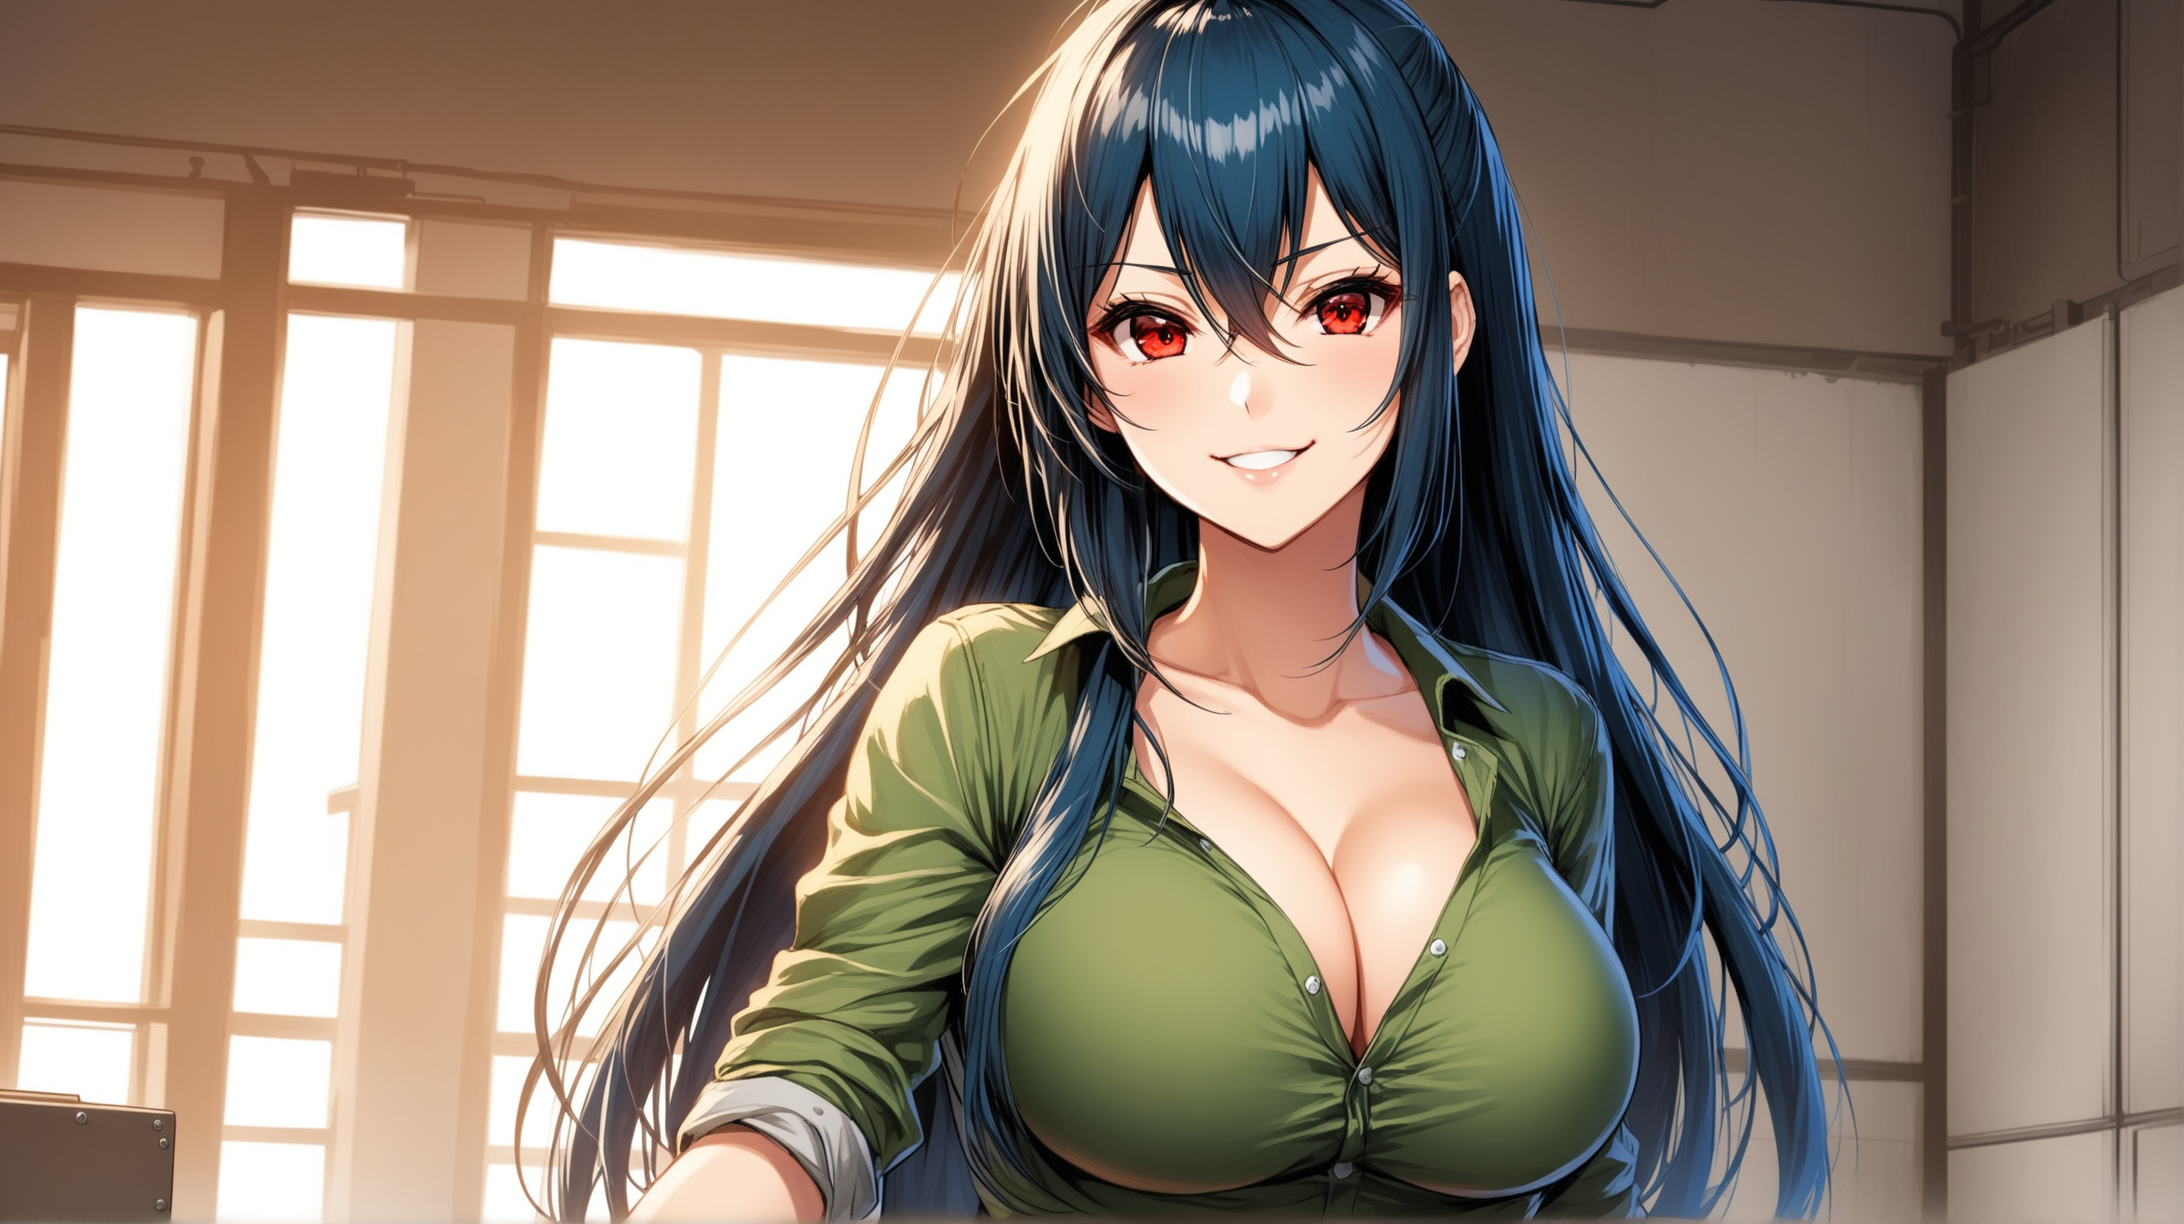 Draw the character Taihou from Azur Lane, red eyes, long hair, high quality, indoors, in a casual pose, wearing an outfit inspired from the Fallout series, smiling at the viewer